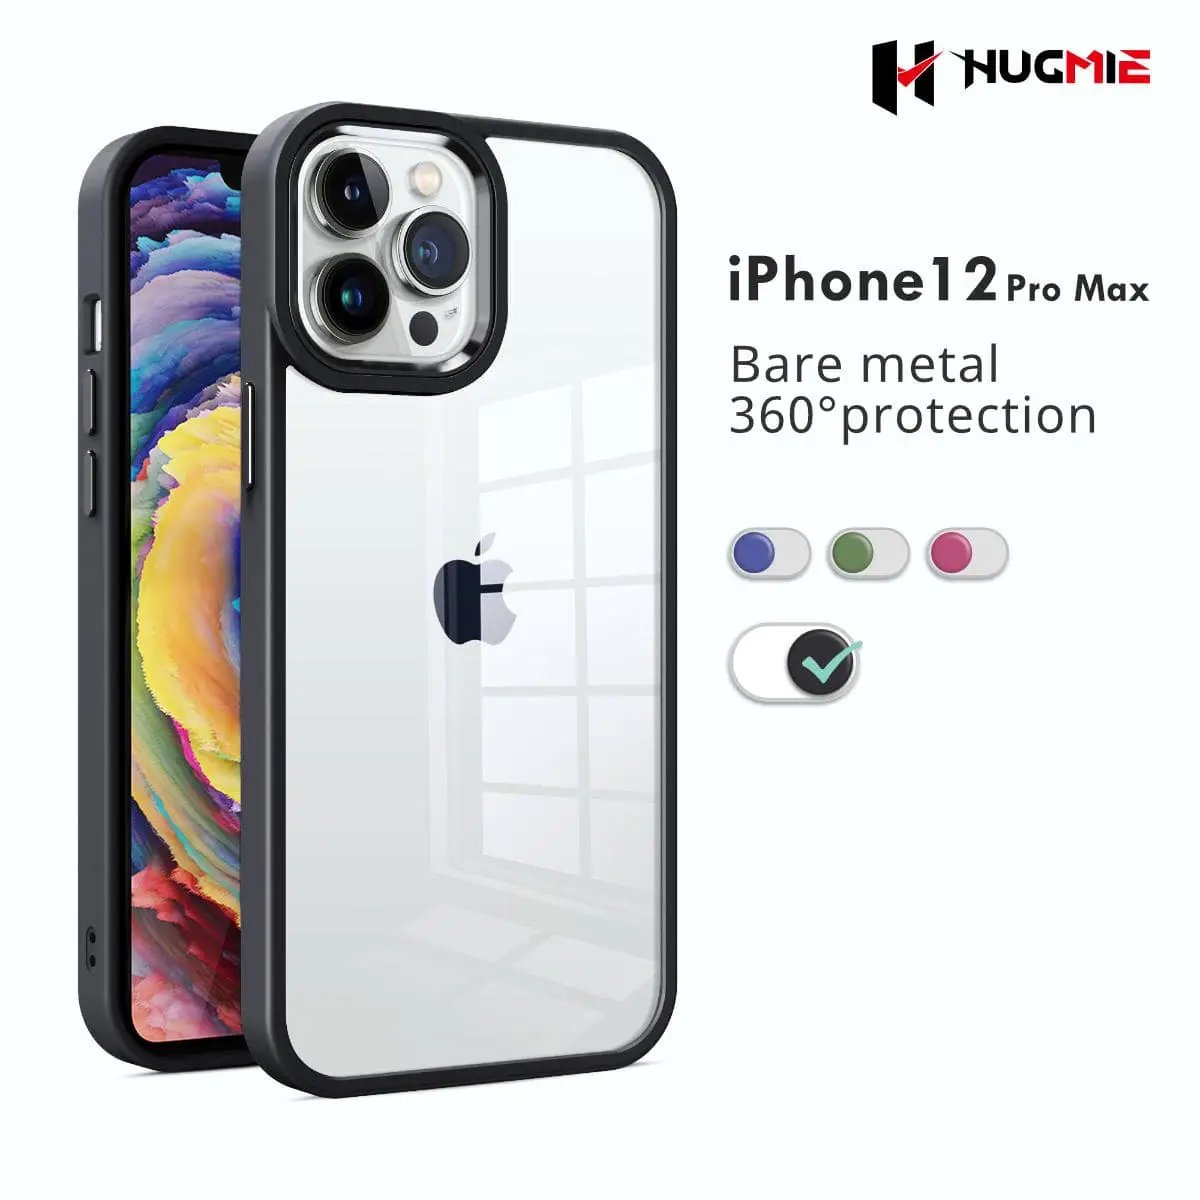 iPhone 12 Pro Max Clear Case Crystal Shield Black - Hugmie